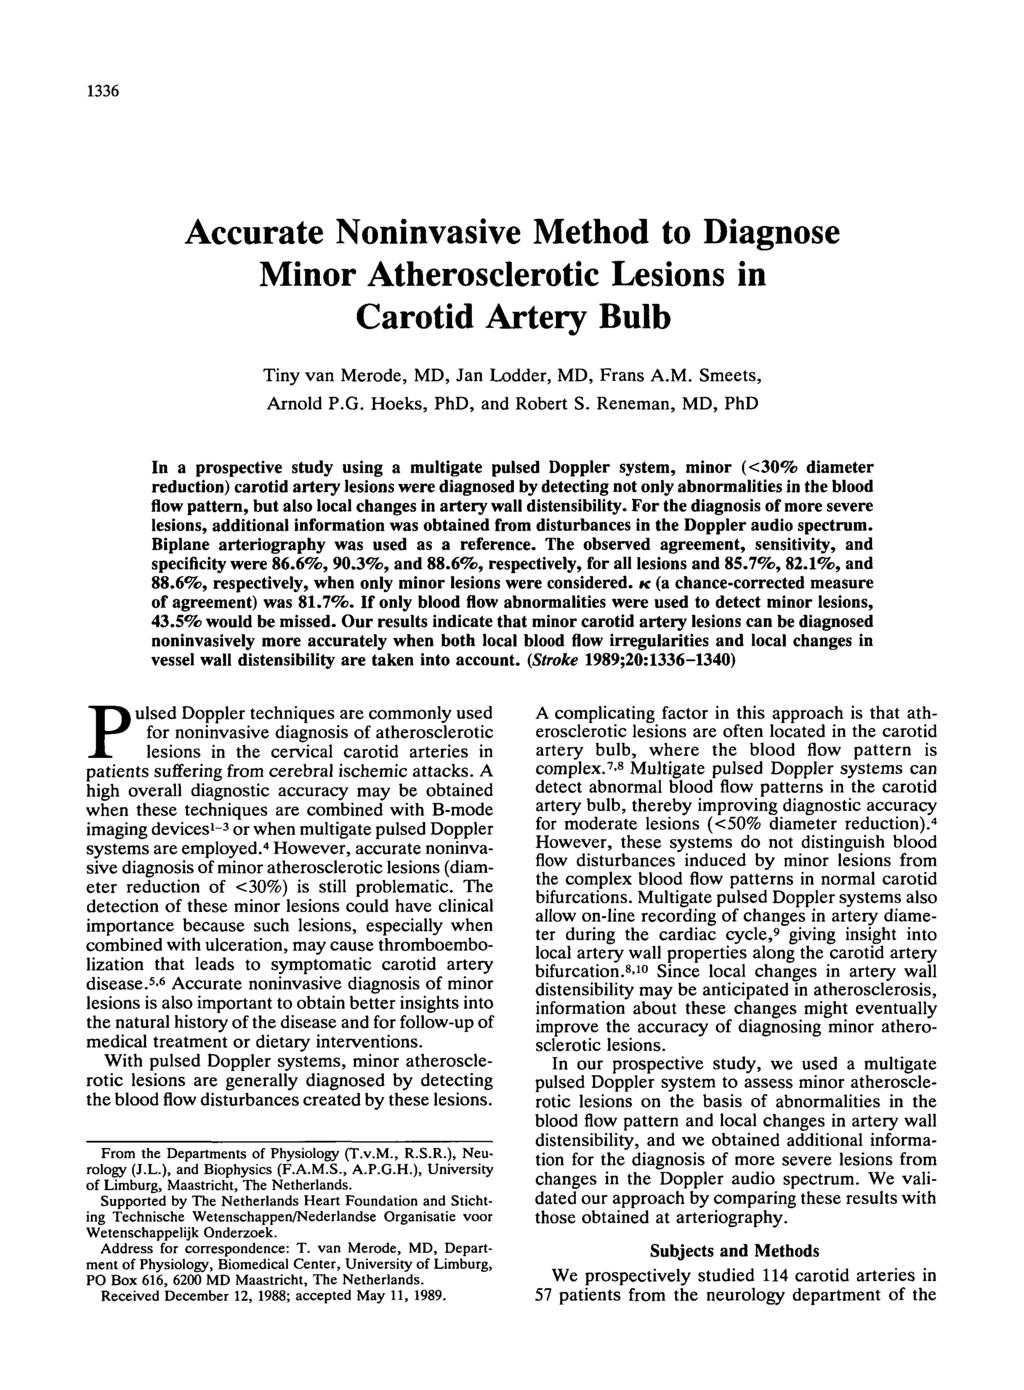 336 Accurate Noninvasive Method to Diagnose Minor Atherosclerotic Lesions in Carotid Artery Bulb Tiny van Merode, MD, Jan Lodder, MD, Frans A.M. Smeets, Arnold P.G. Hoeks, PhD, and Robert S.